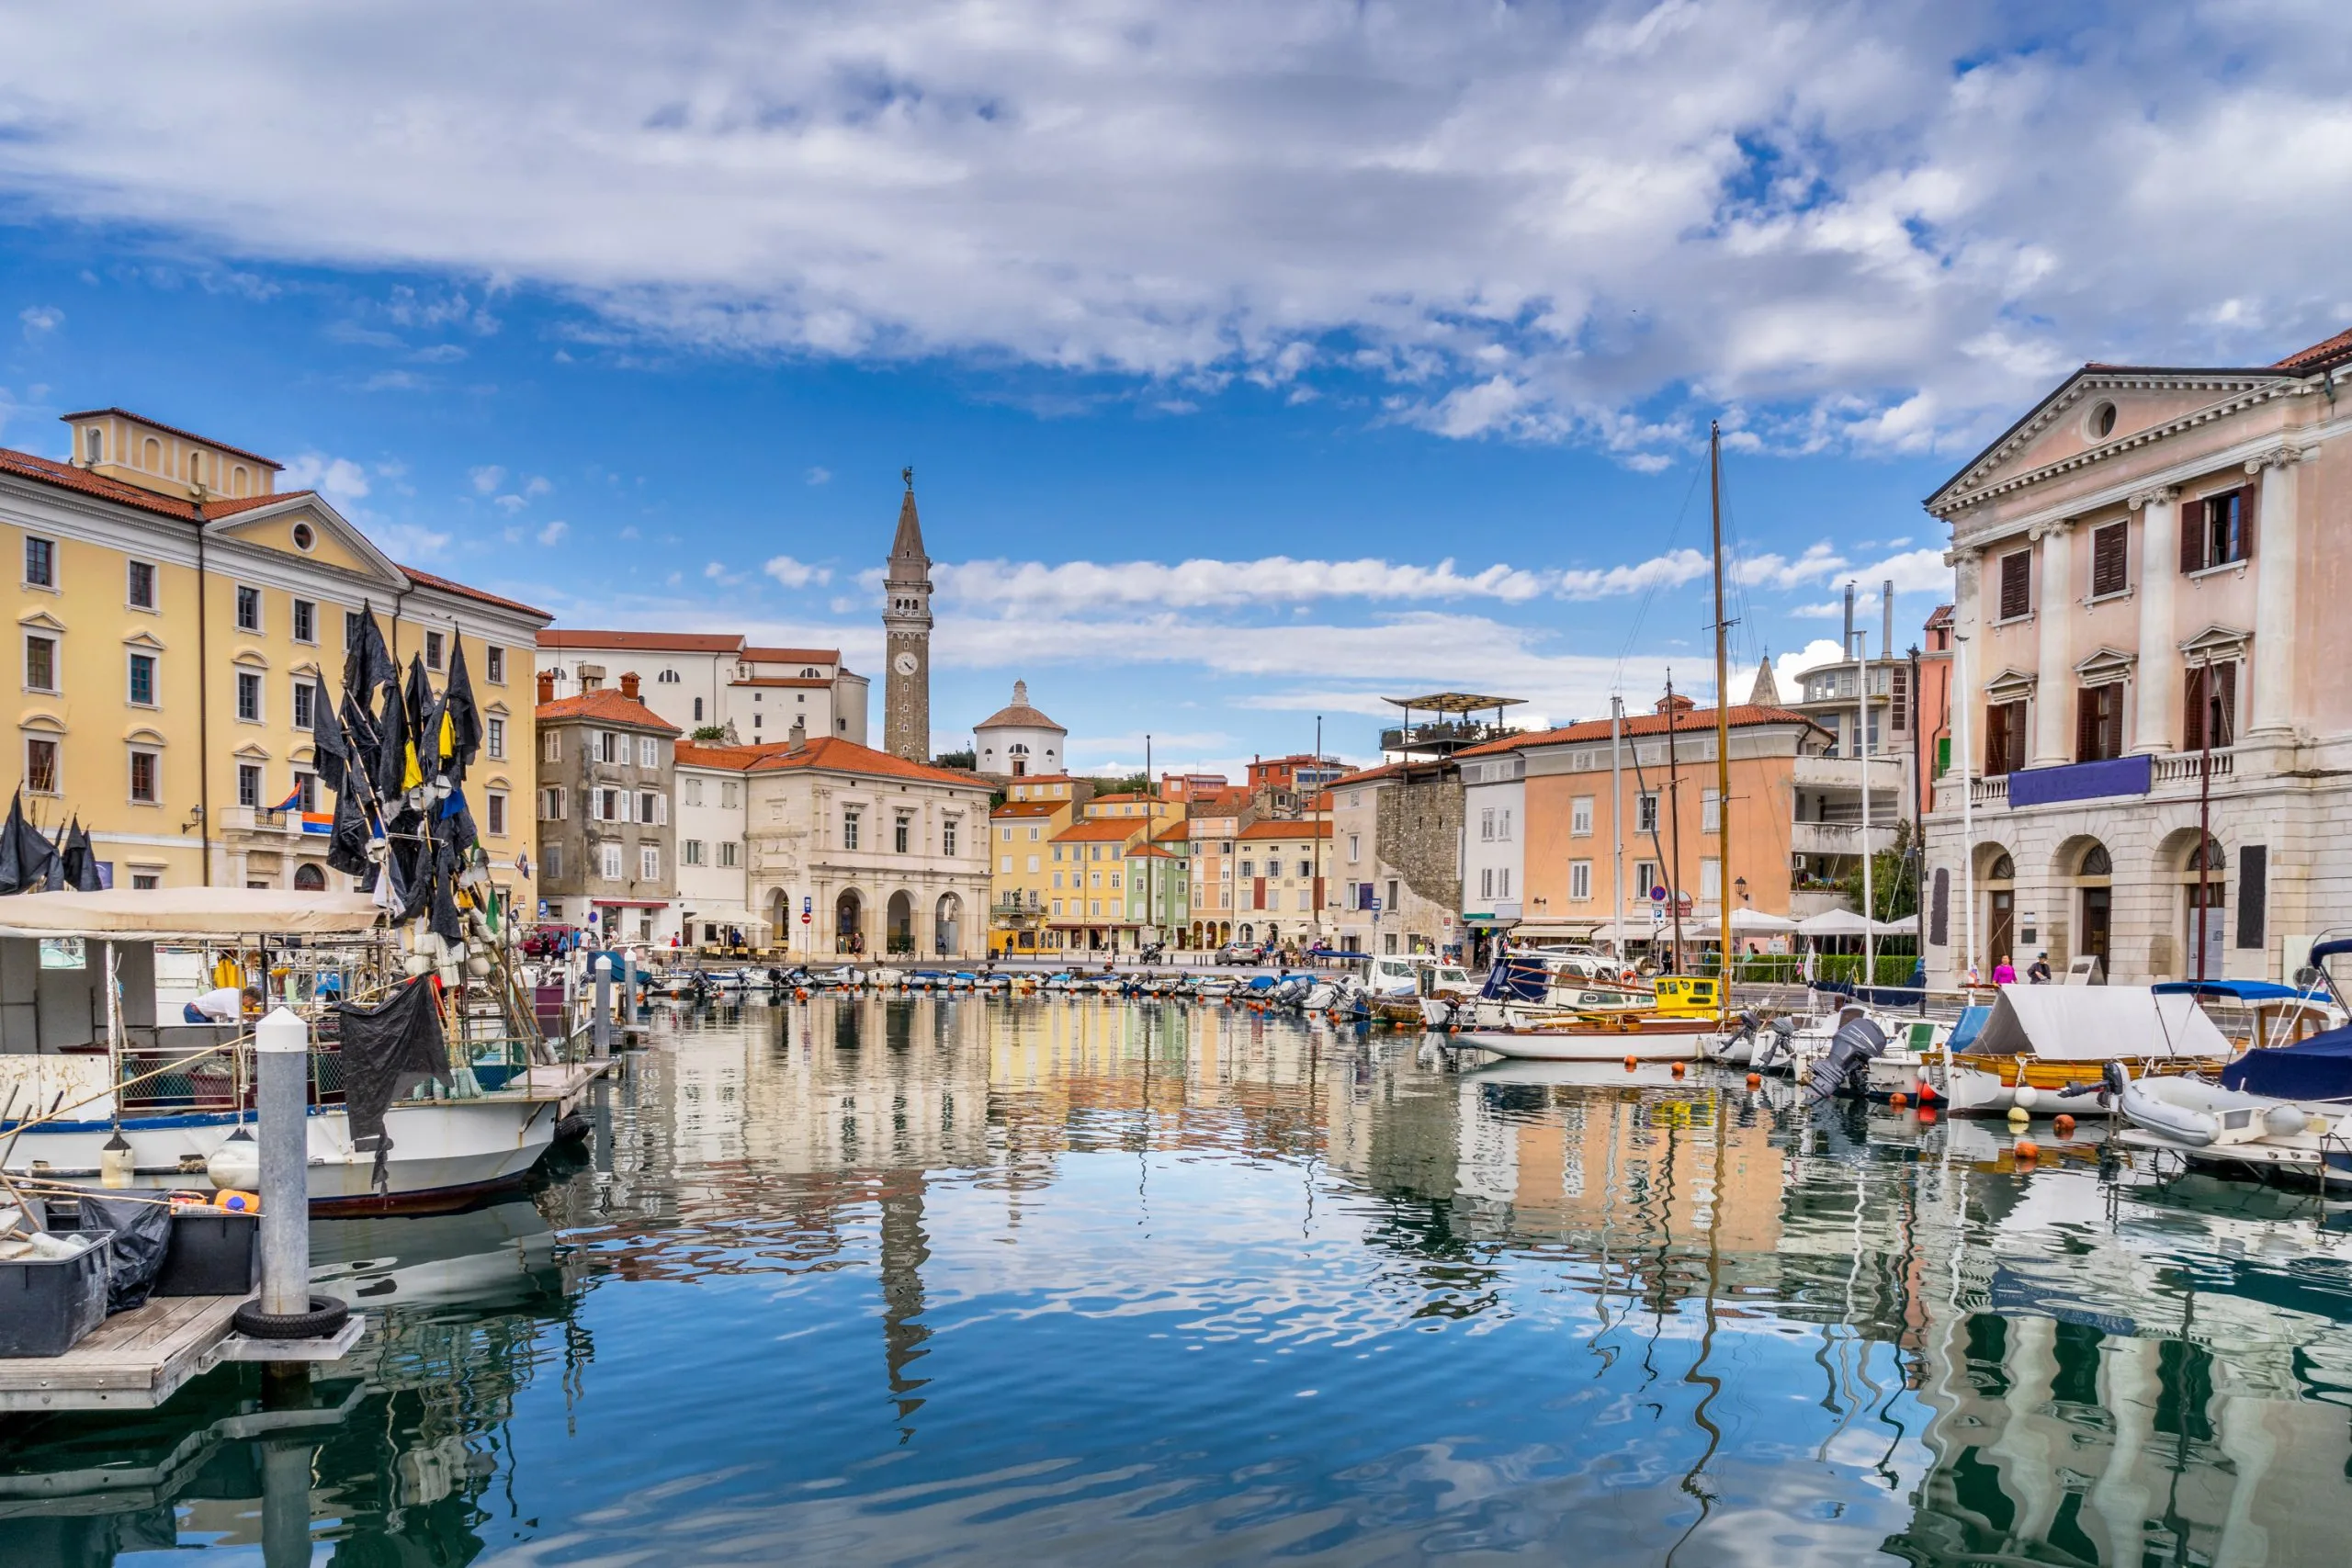 Looking across the marina in the town of Piran in Slovenia